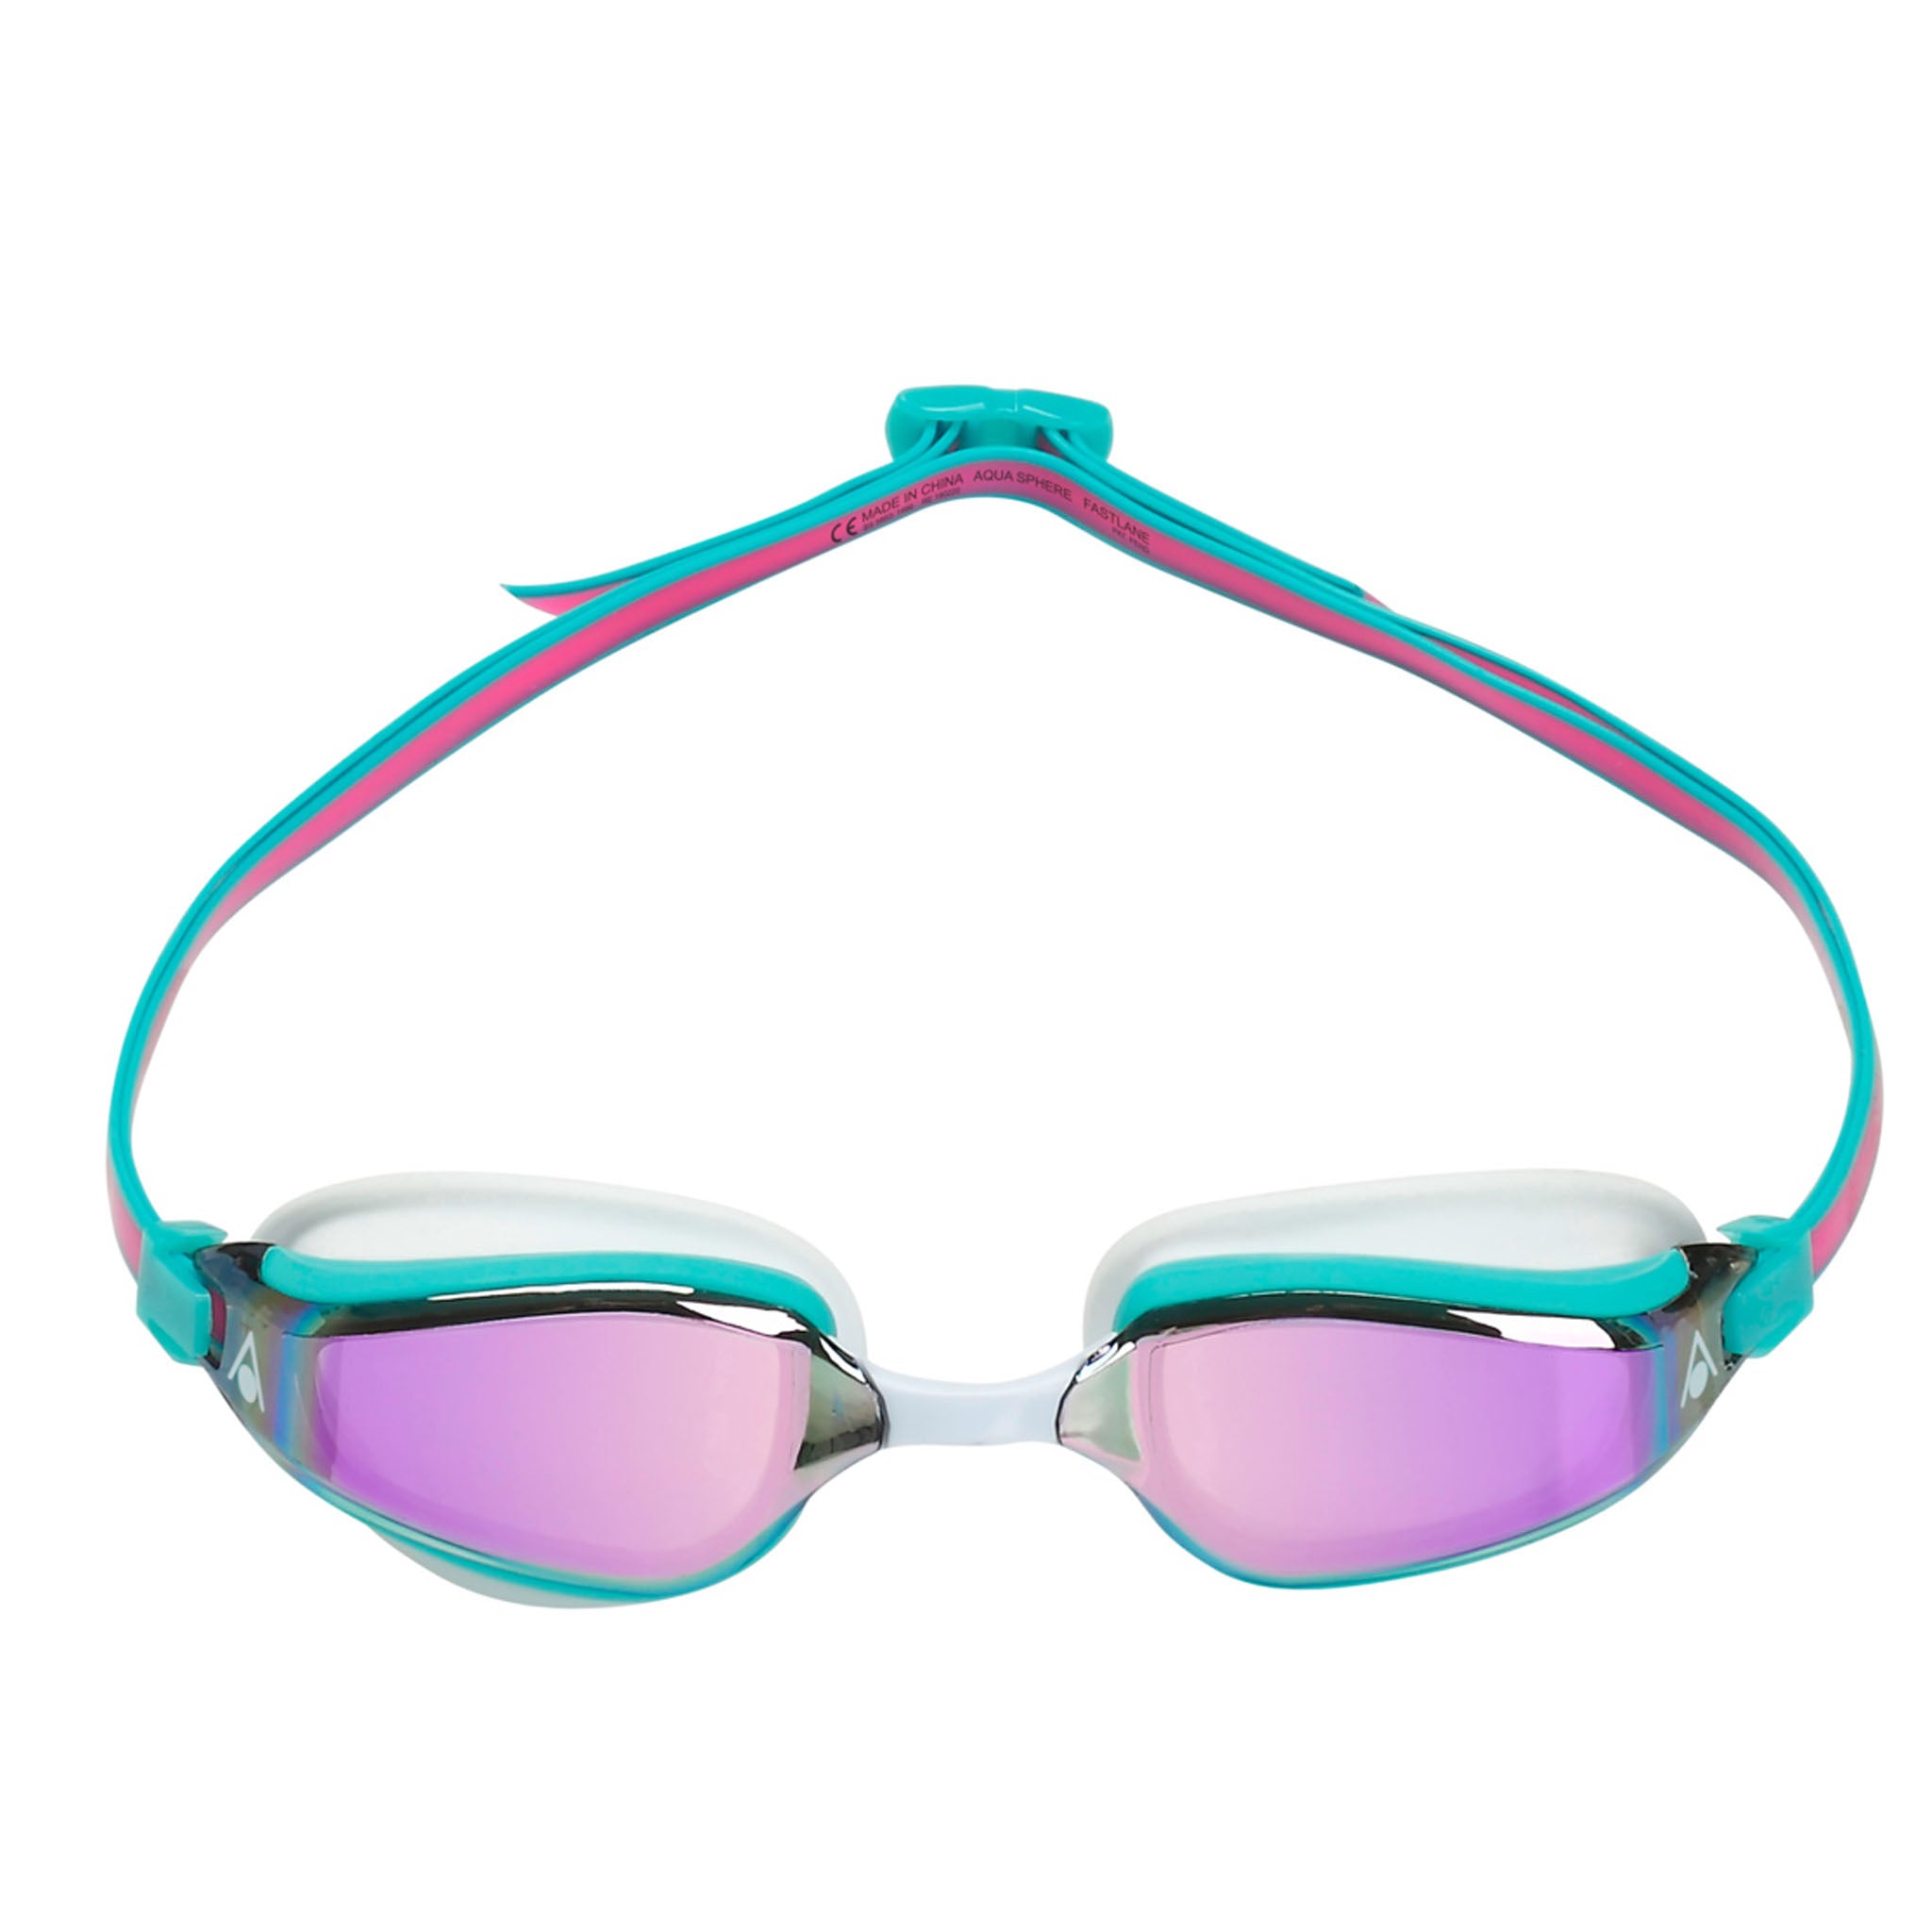 Aqua Sphere Fastlane Swimming Goggles Pink Turquoise with Pink Titanium Mirrored Lenses - Front